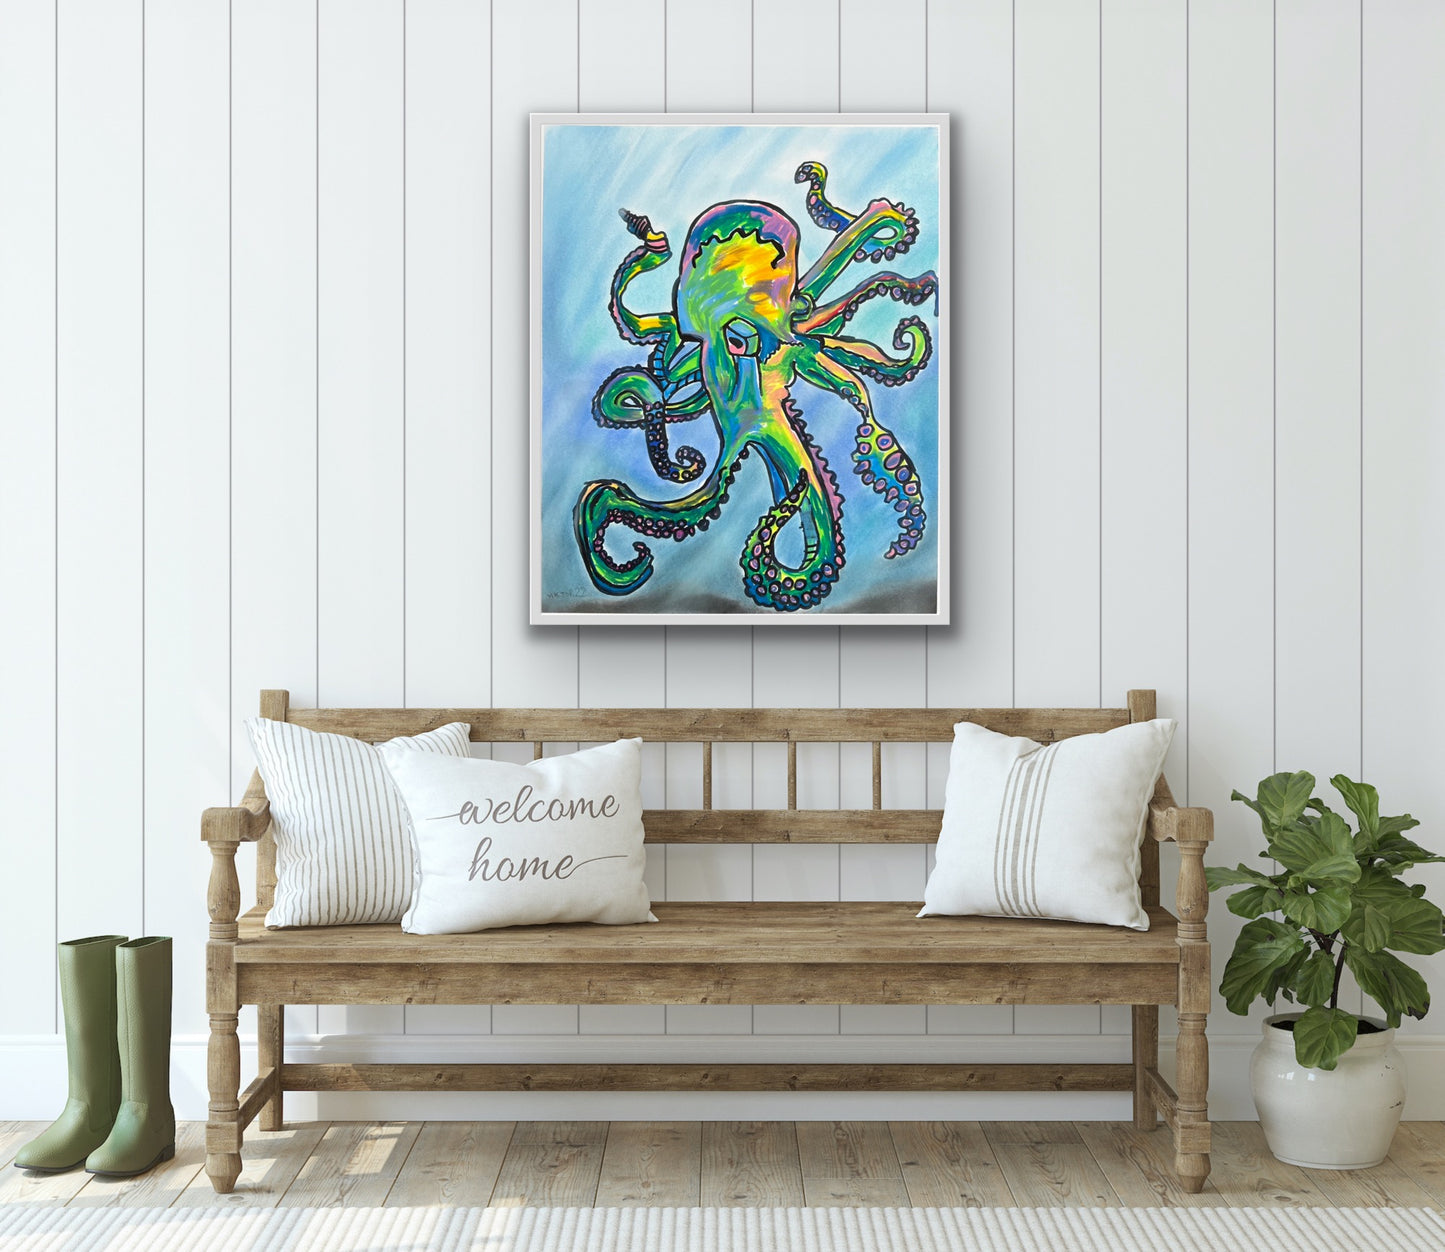 Octopus - Stretched Canvas Print in more sizes